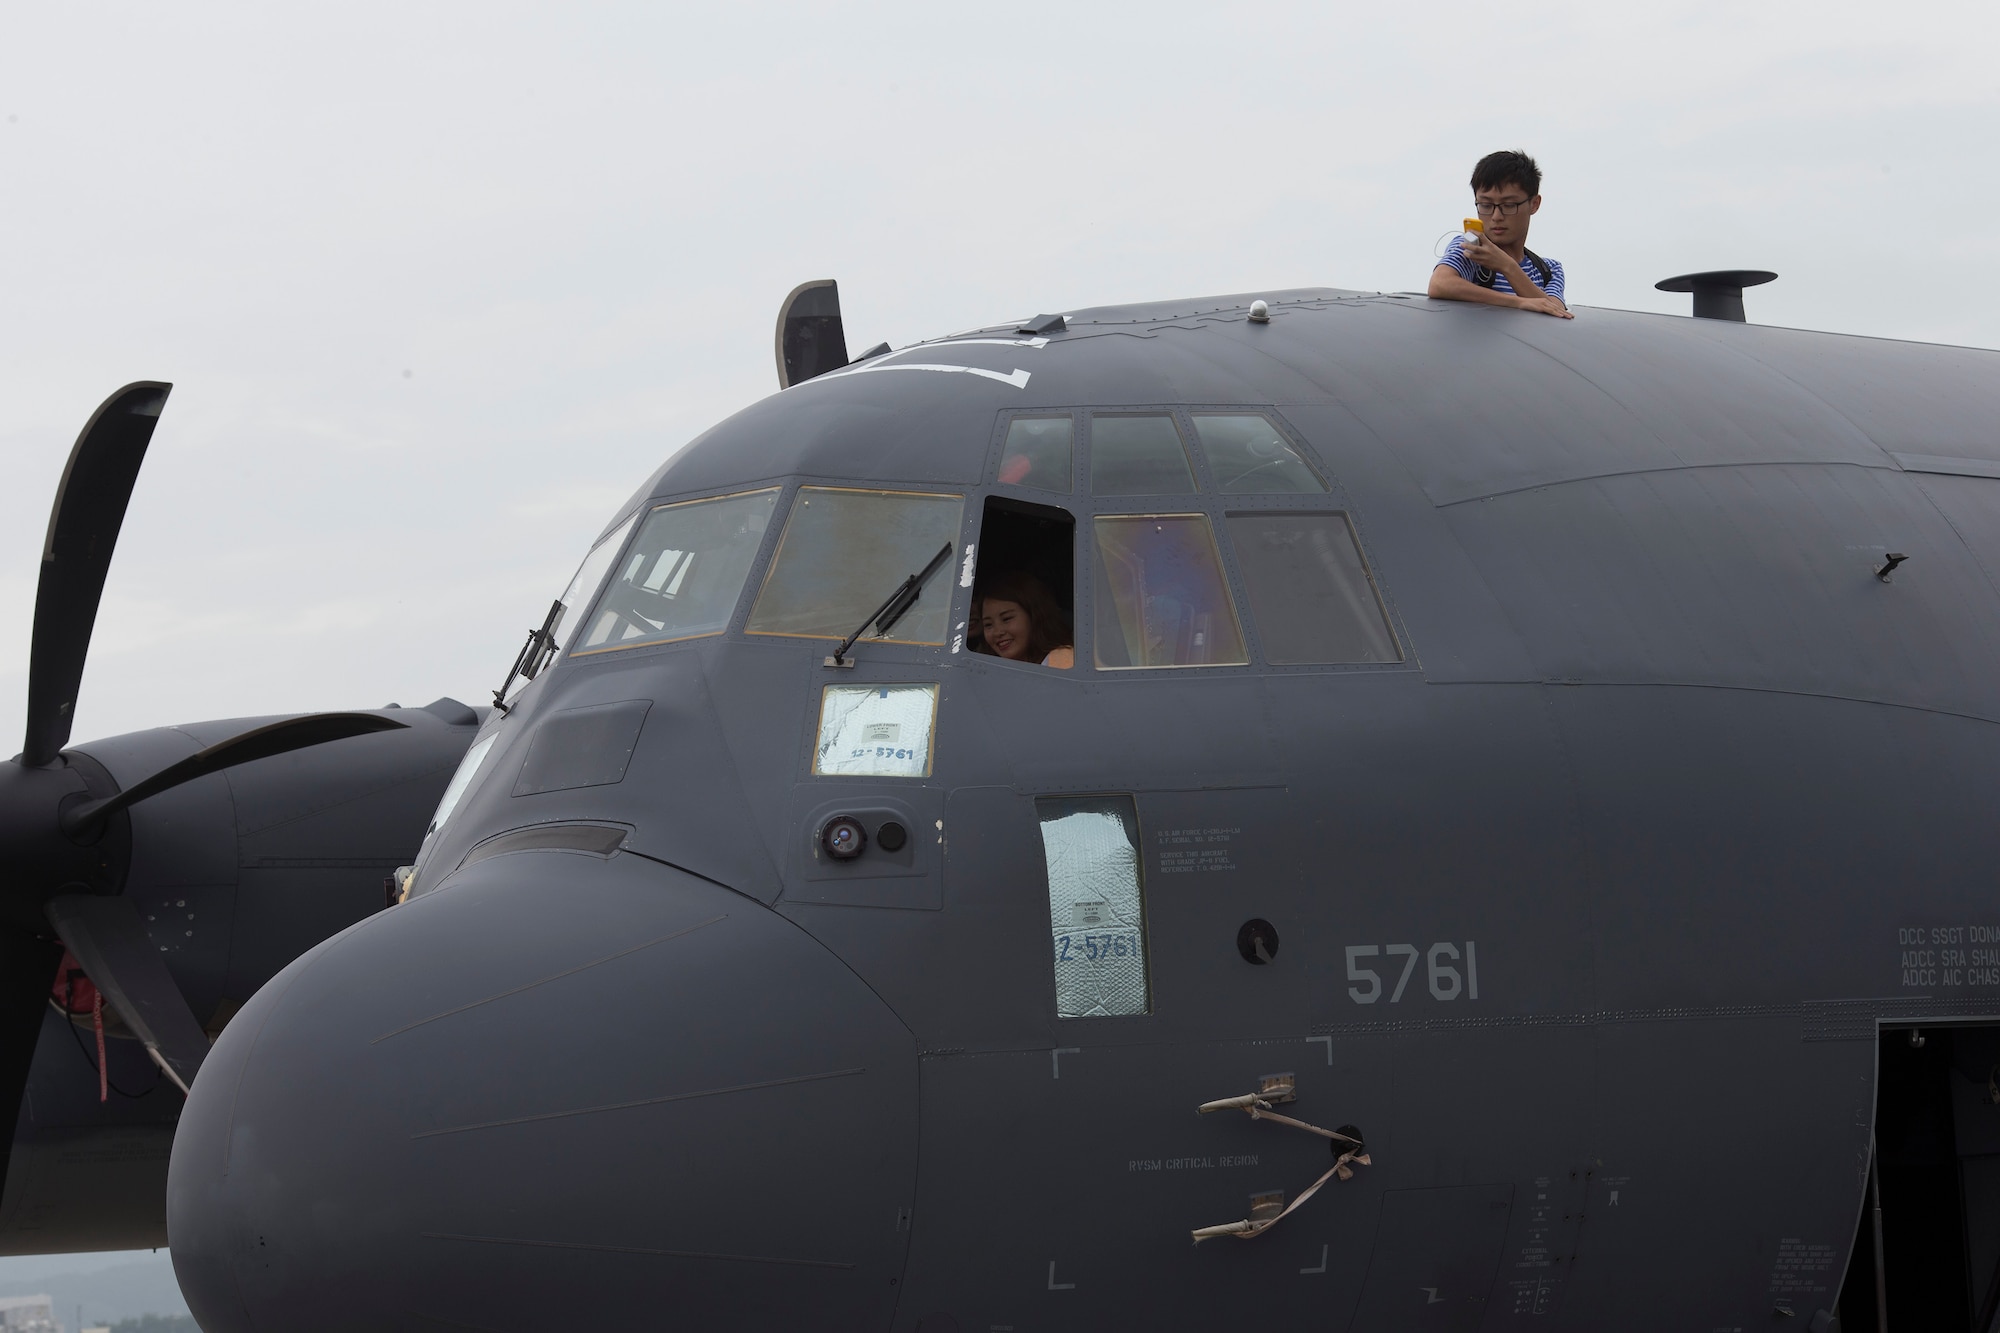 Japanese festivalgoers take photos from a MC-130J Commando II during the 2016 Friendship Festival at Yokota Air Base, Japan, Sept. 18, 2016. The MC-130J Commando II is assigned to the 353rd Special Operations Group's 17th Special Operations Squadron. (U.S. Air Force photo by Yasuo Osakabe/Released)